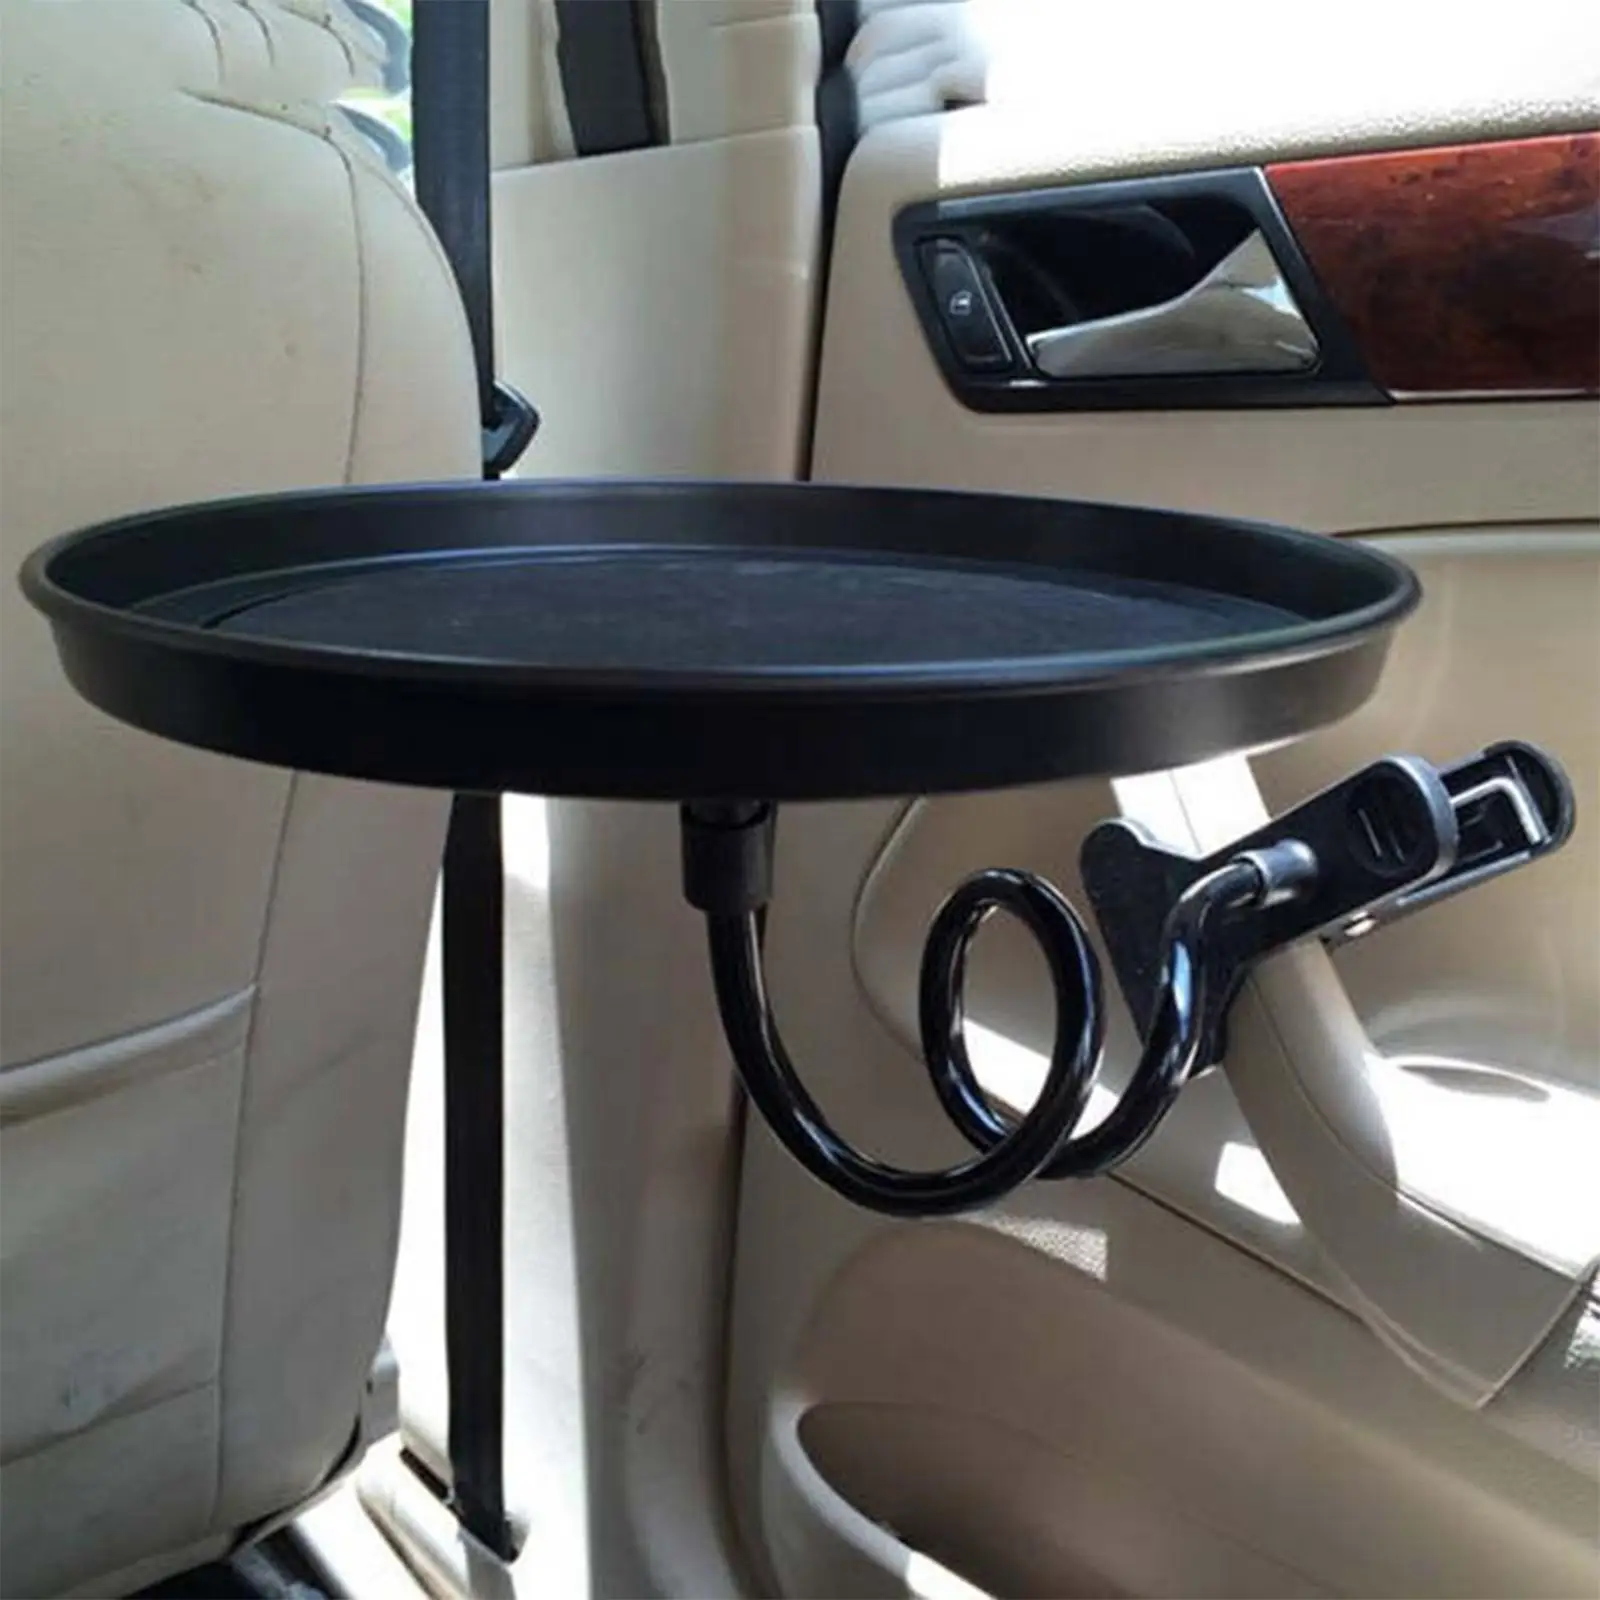 1x Car Food Tray Organizer Non-Slip Universal Stand W/ Clamp for Table